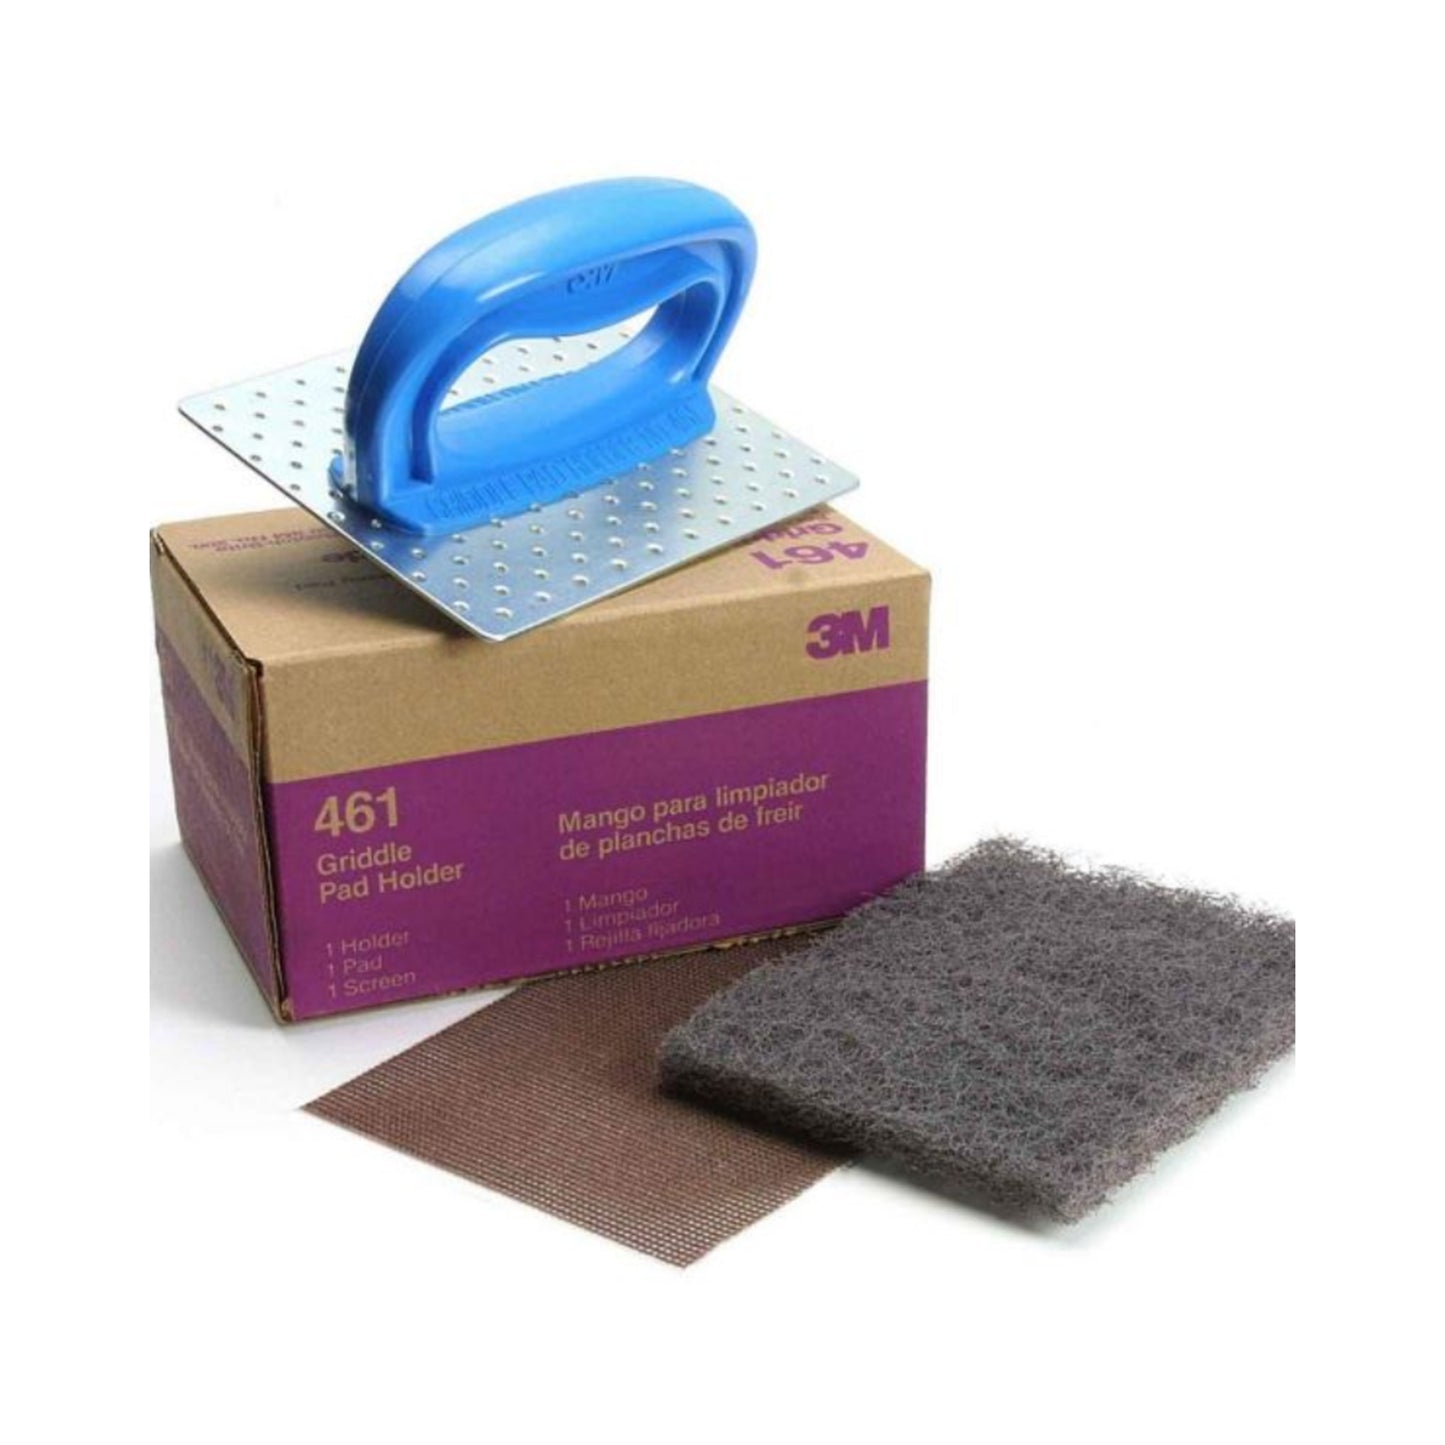 EVO Cooksurface Cleaning Kit